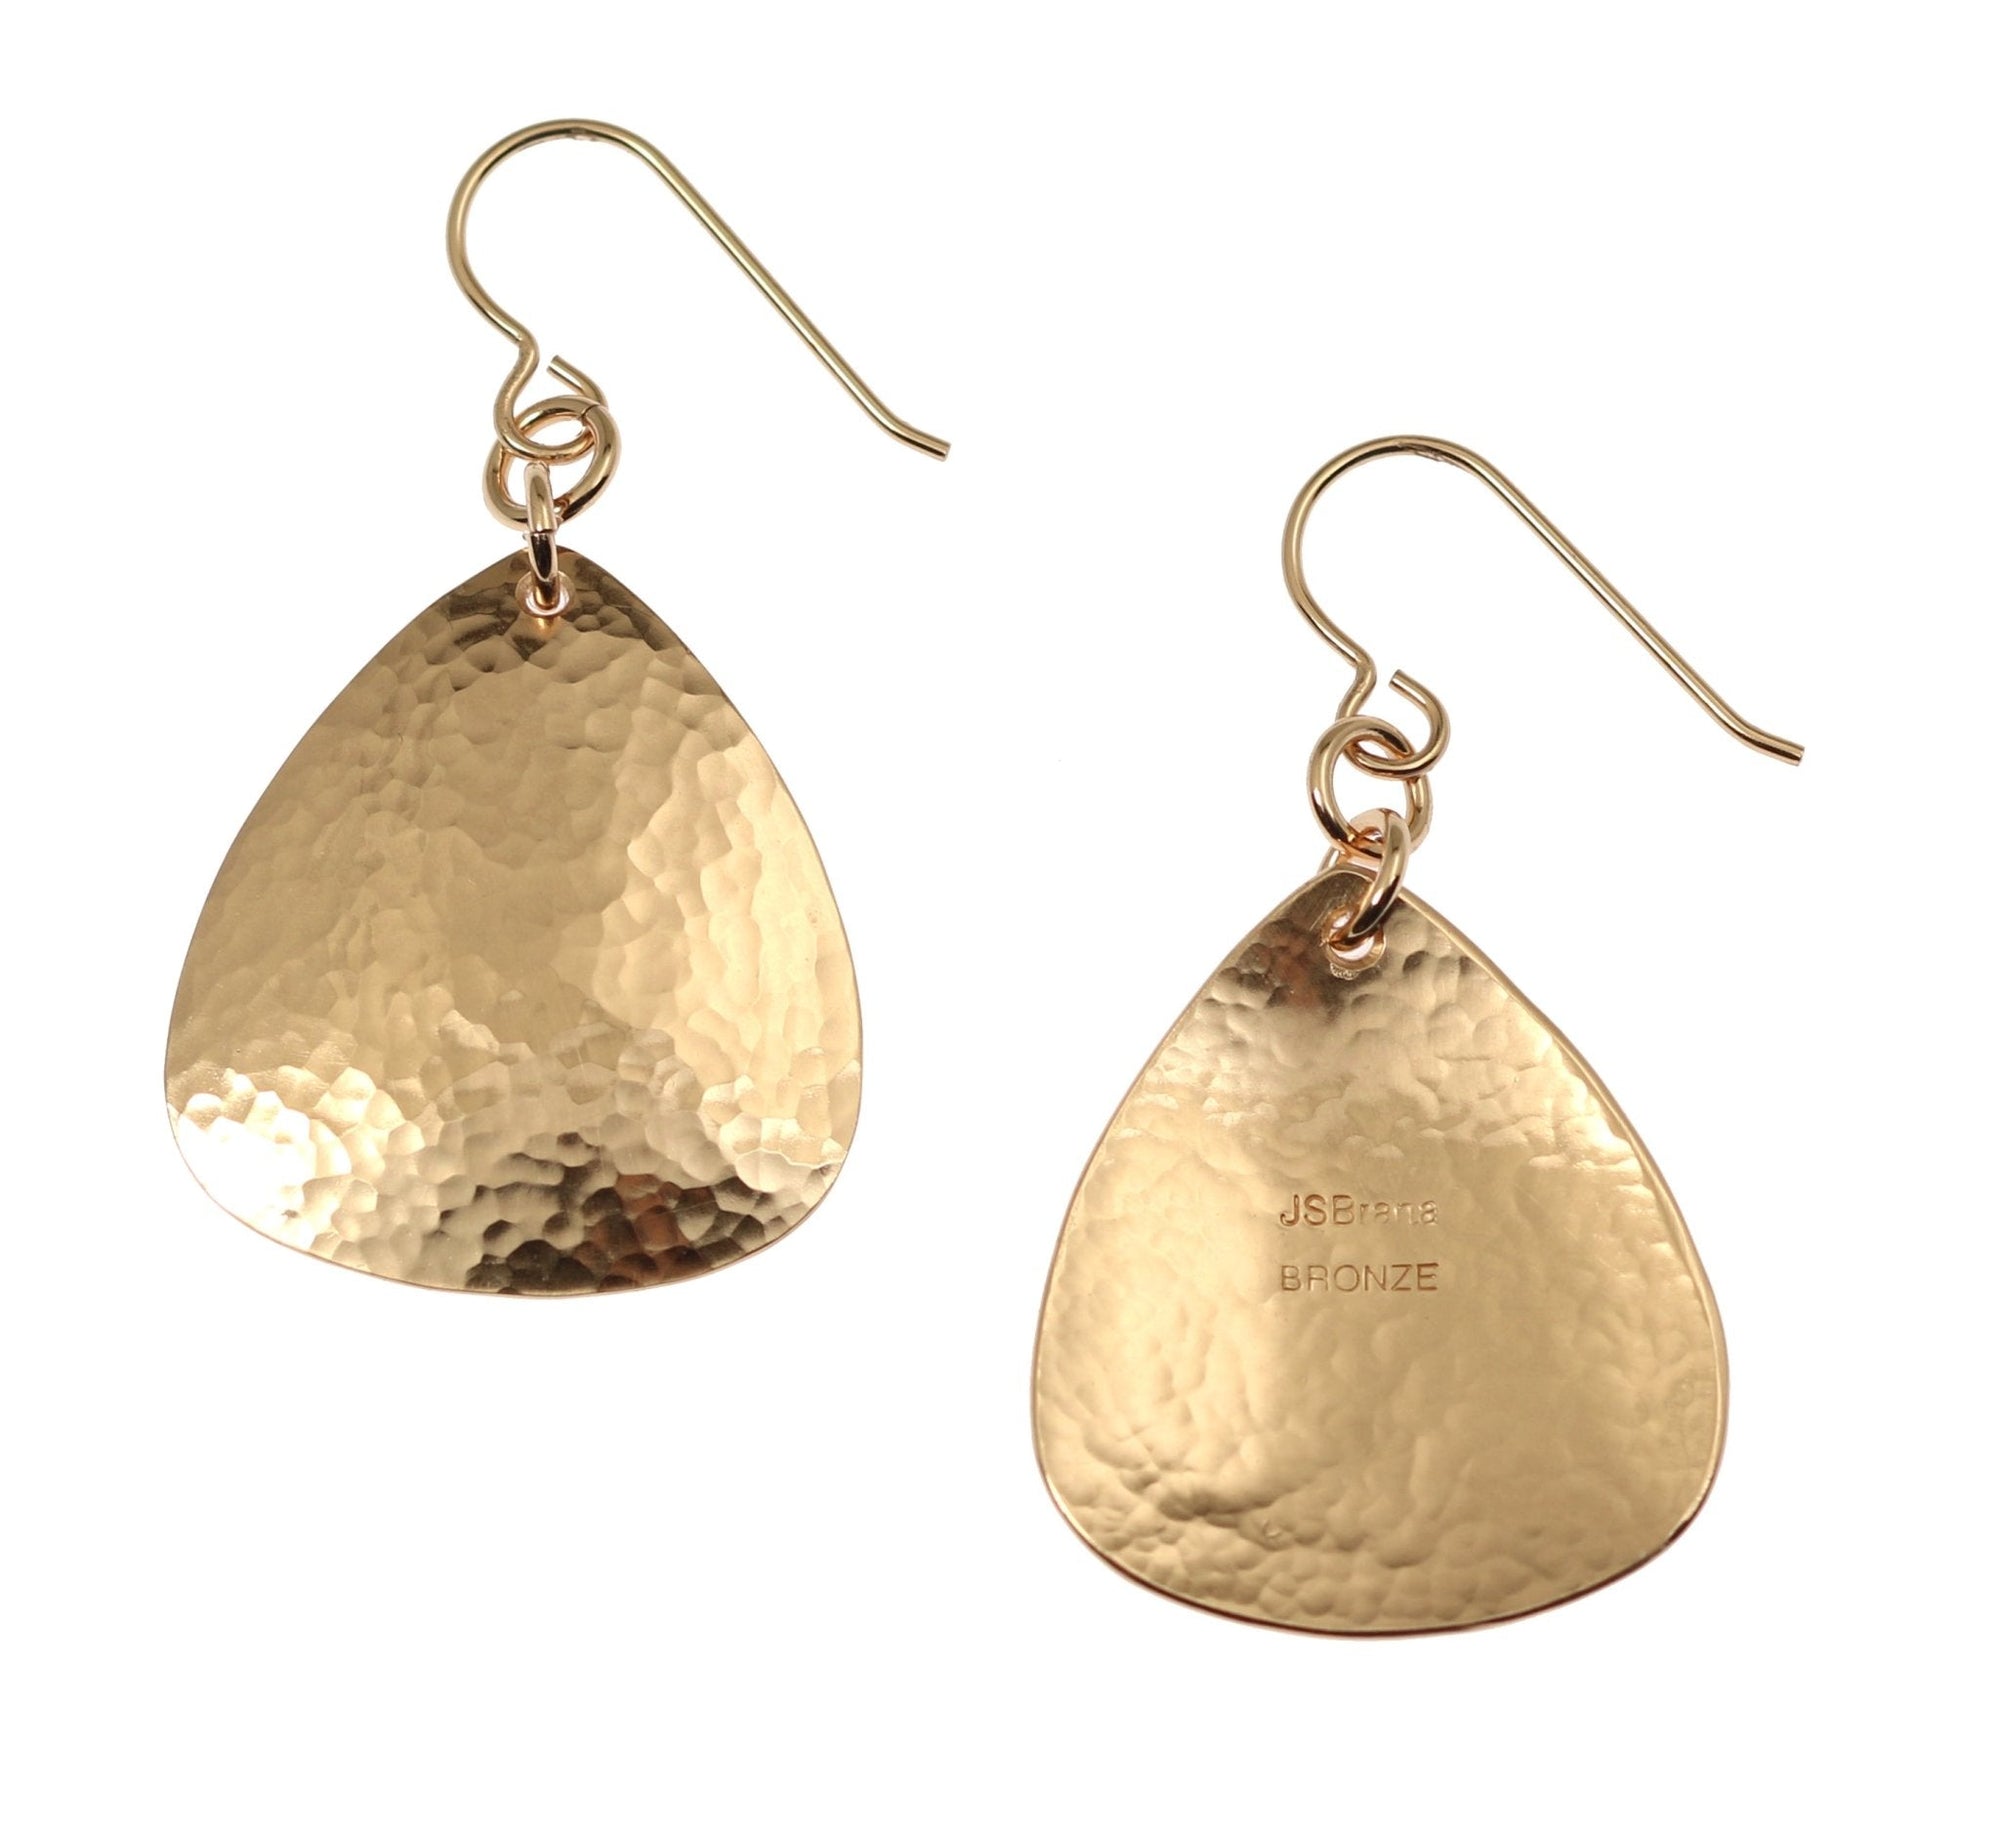 Detail View of Hammered Bronze Triangular Earrings